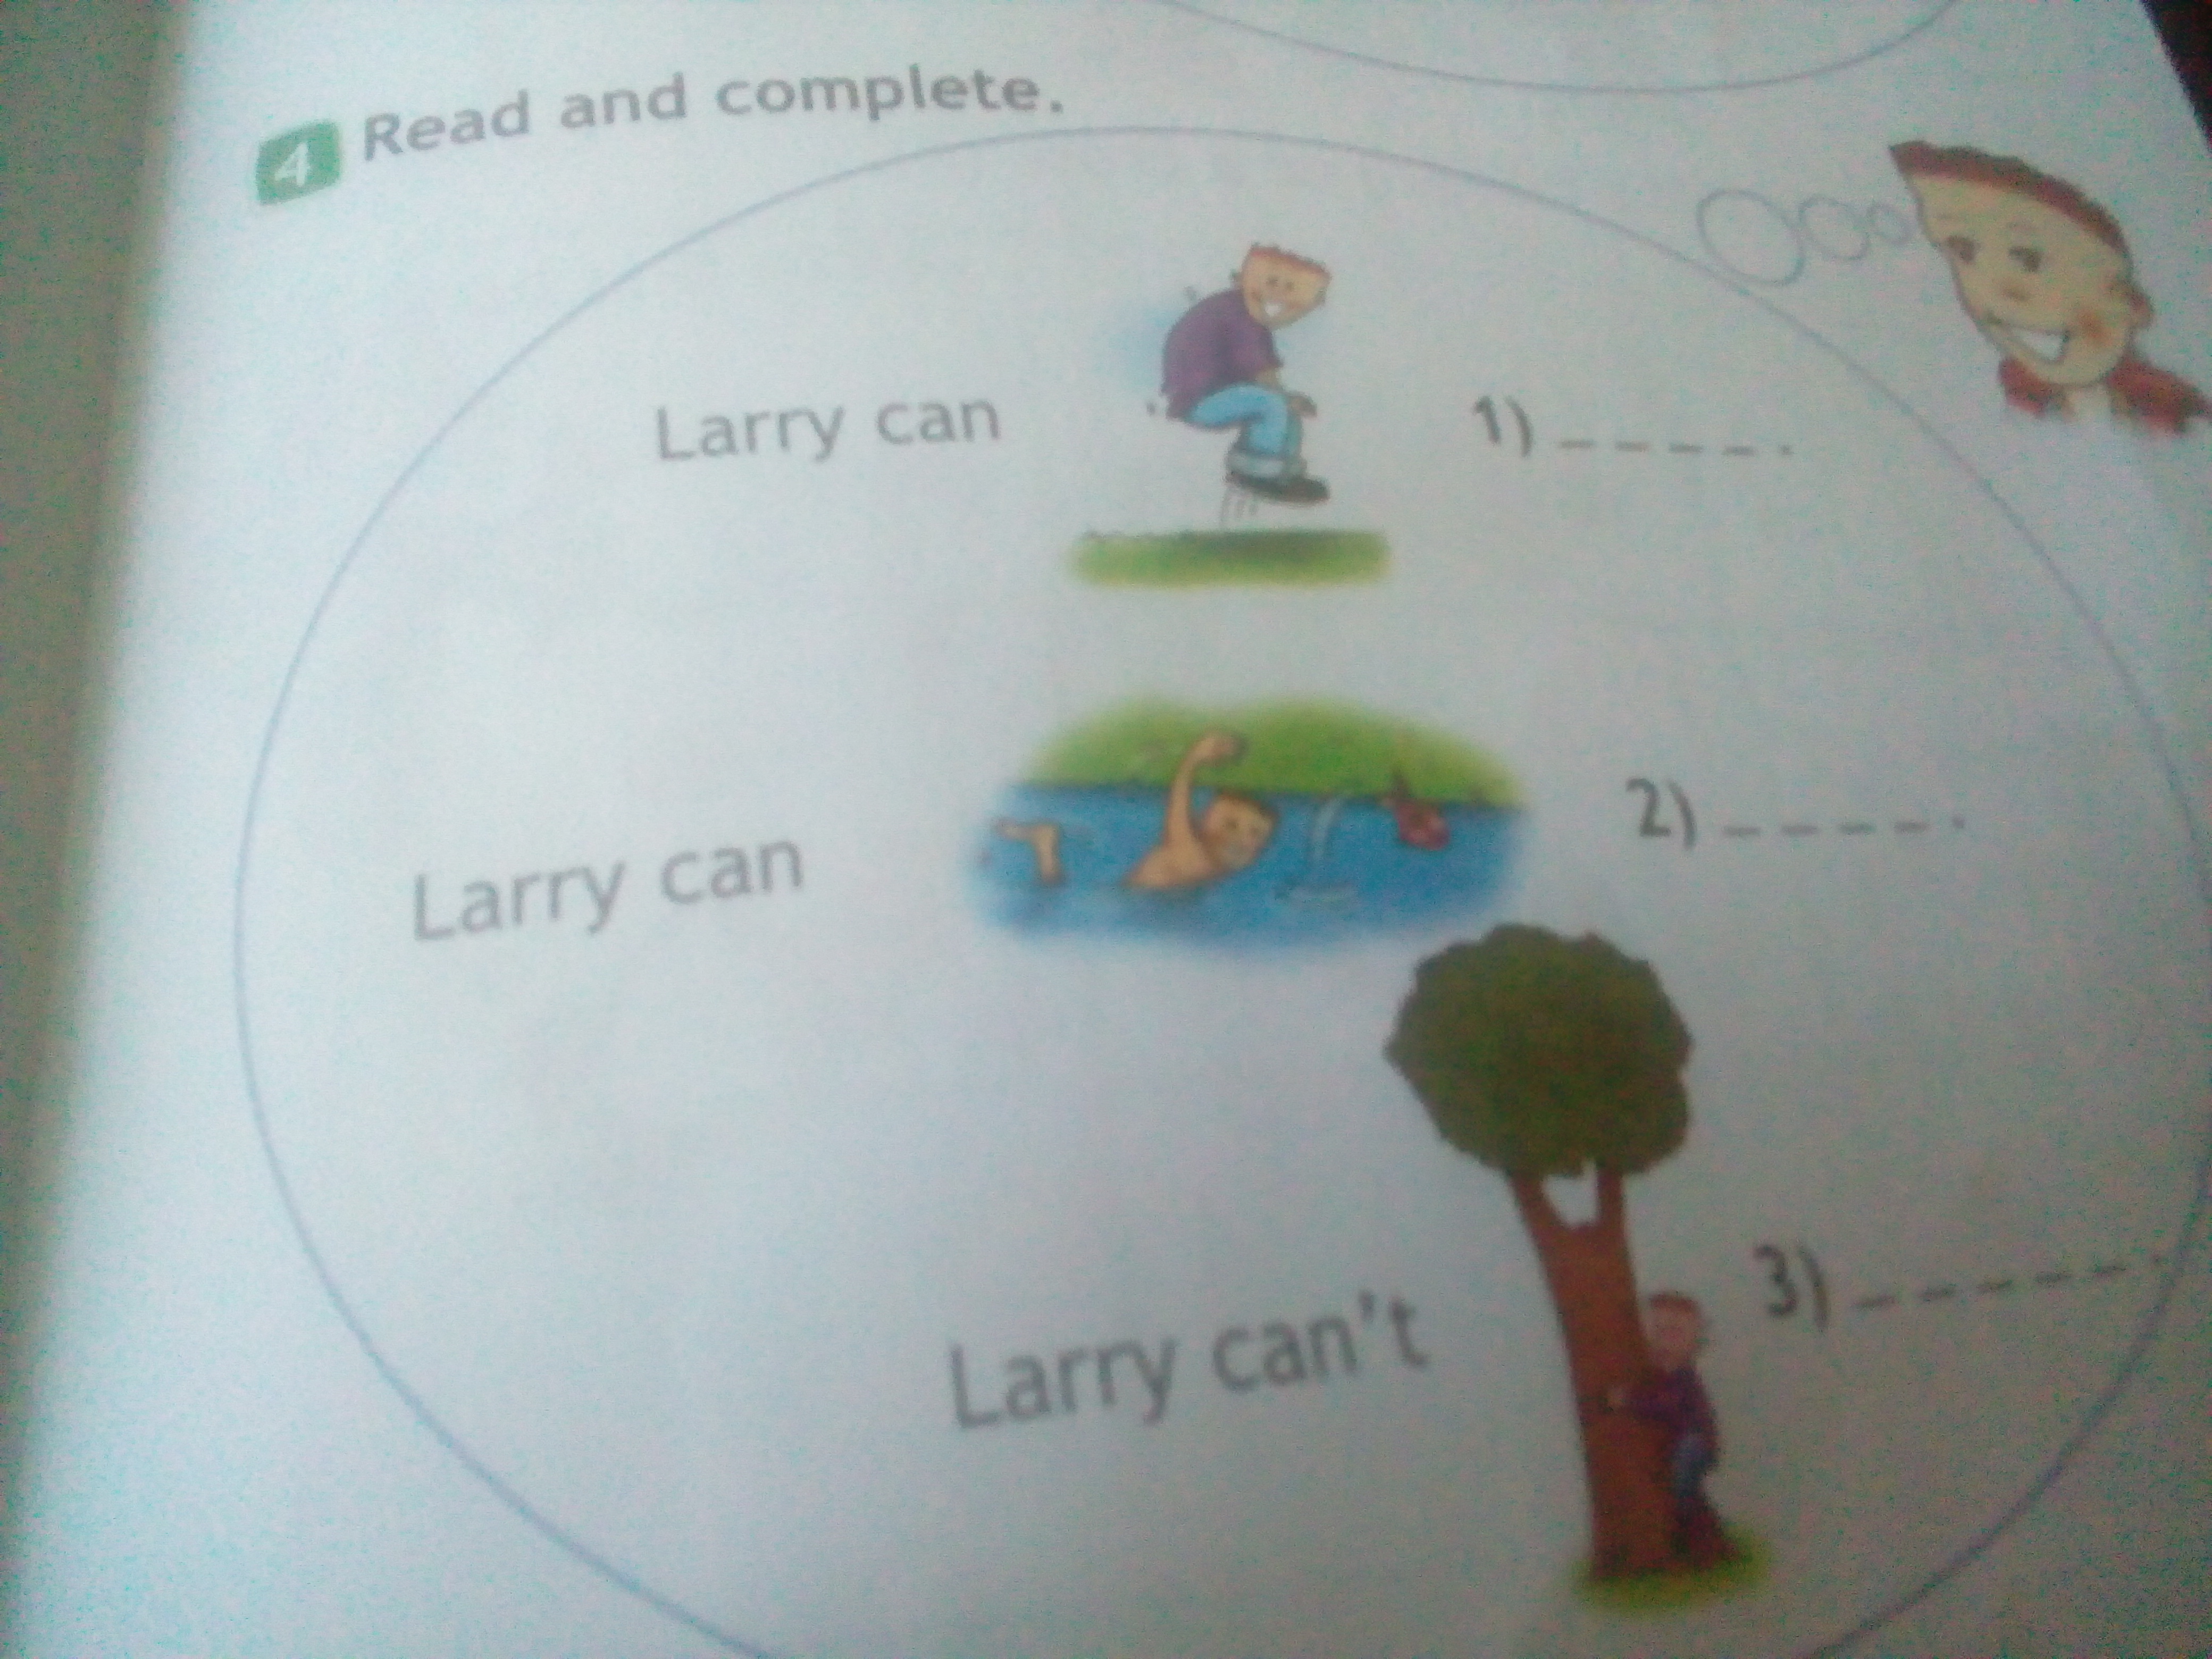 Read and complete 2 класс. Read and complete 4 класс. Look read and complete. (15 Marks) 3 класс. Read and complete Larry can 2 класс. 1 Read and complete..